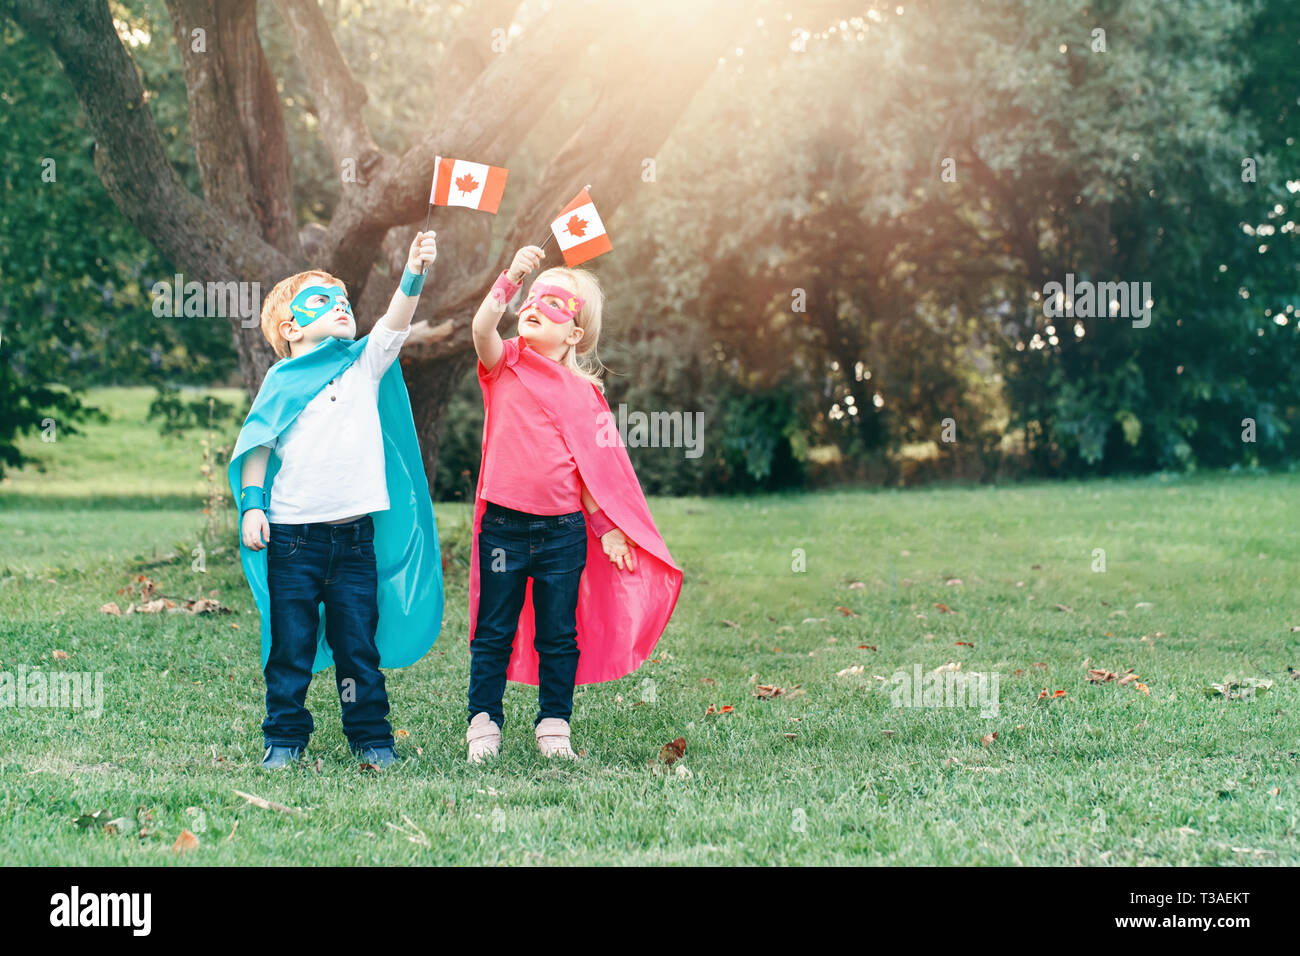 Caucasian children in superhero costumes and masks holding waving Canadian flag. Boys, girl celebrating national holiday Canada day in summer park Stock Photo